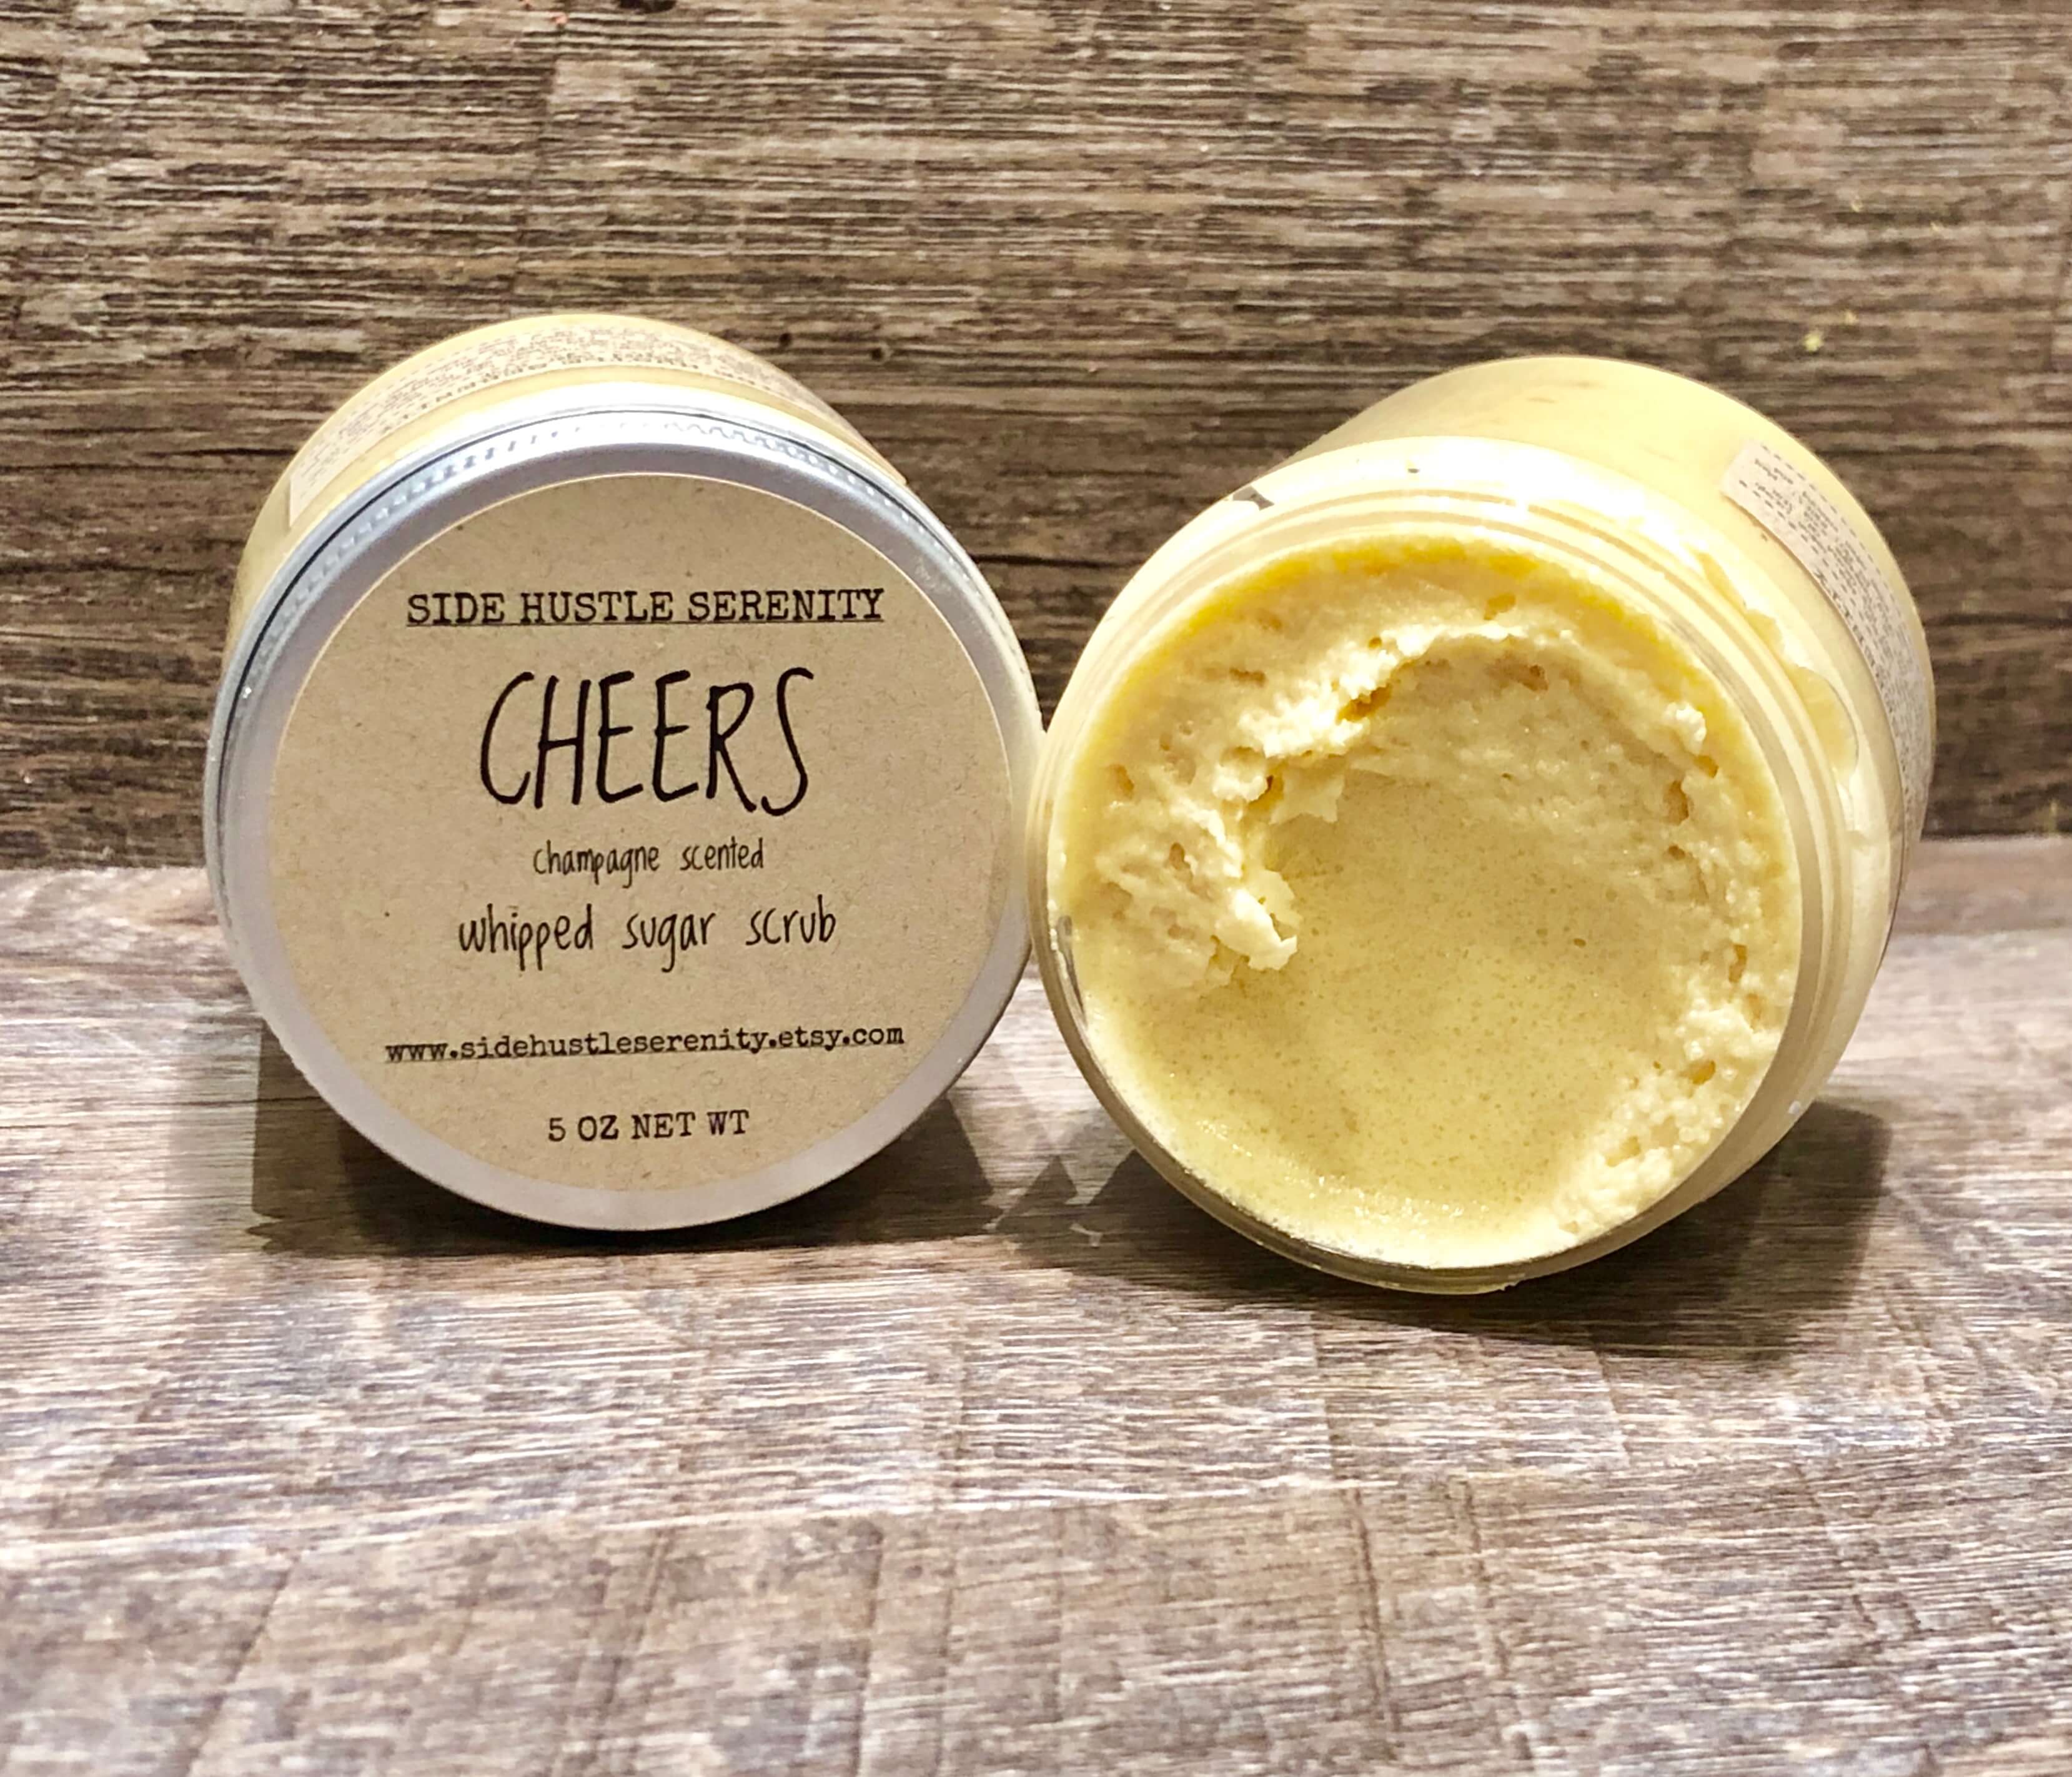 Whipped Sugar Scrub | CHEERS "Champagne" Scented - Side Hustle Serenity